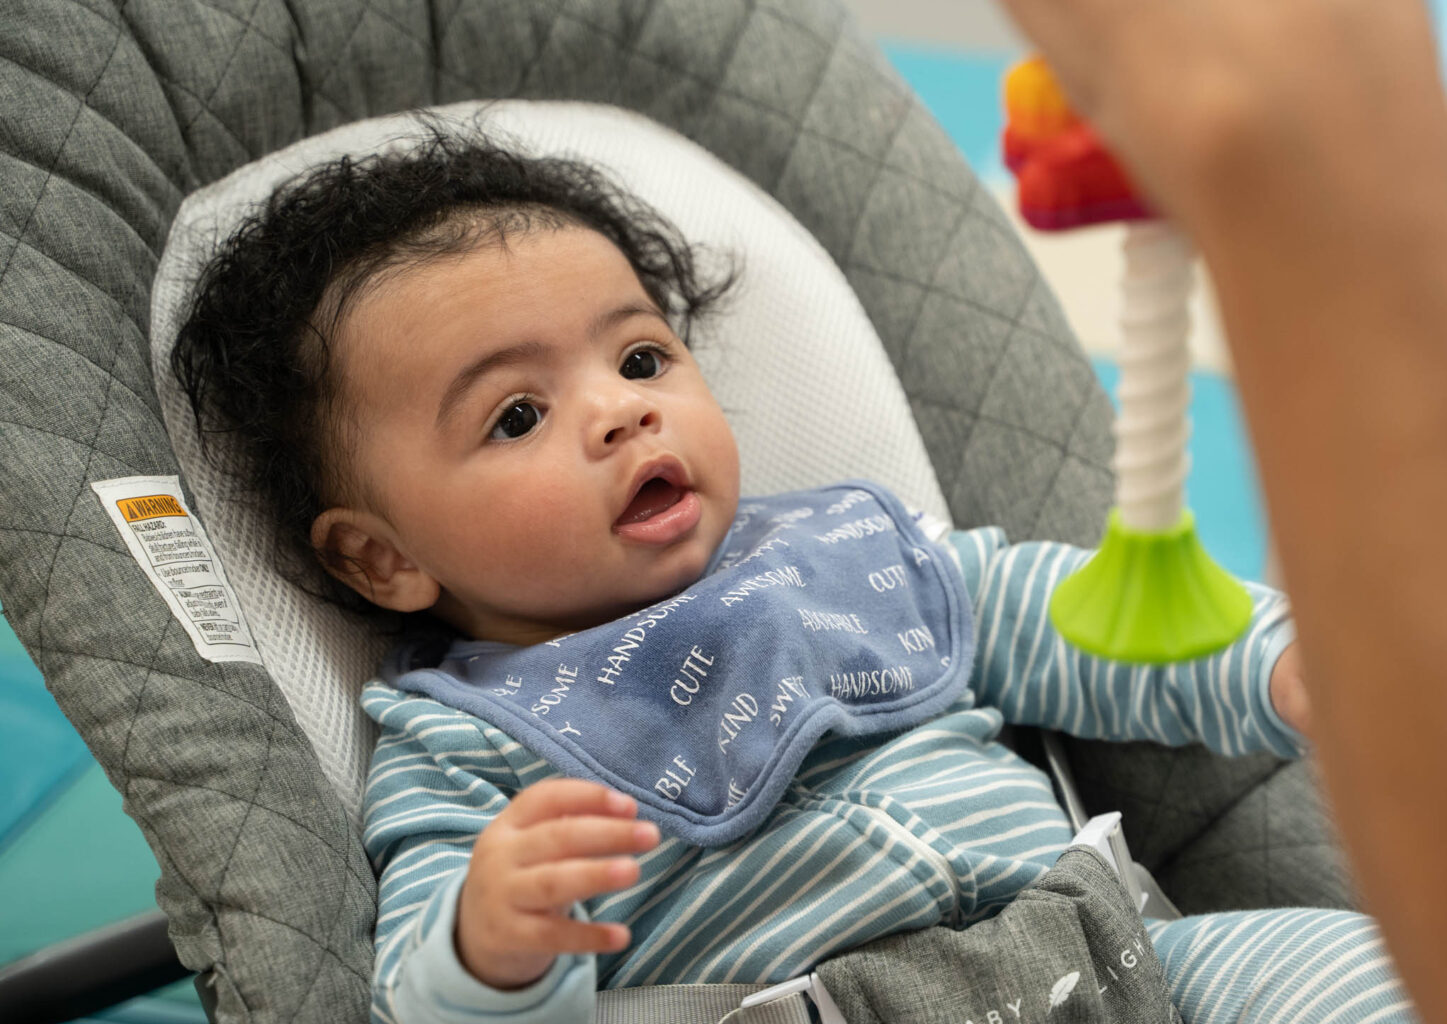 A baby in a high chair playing with a toy.